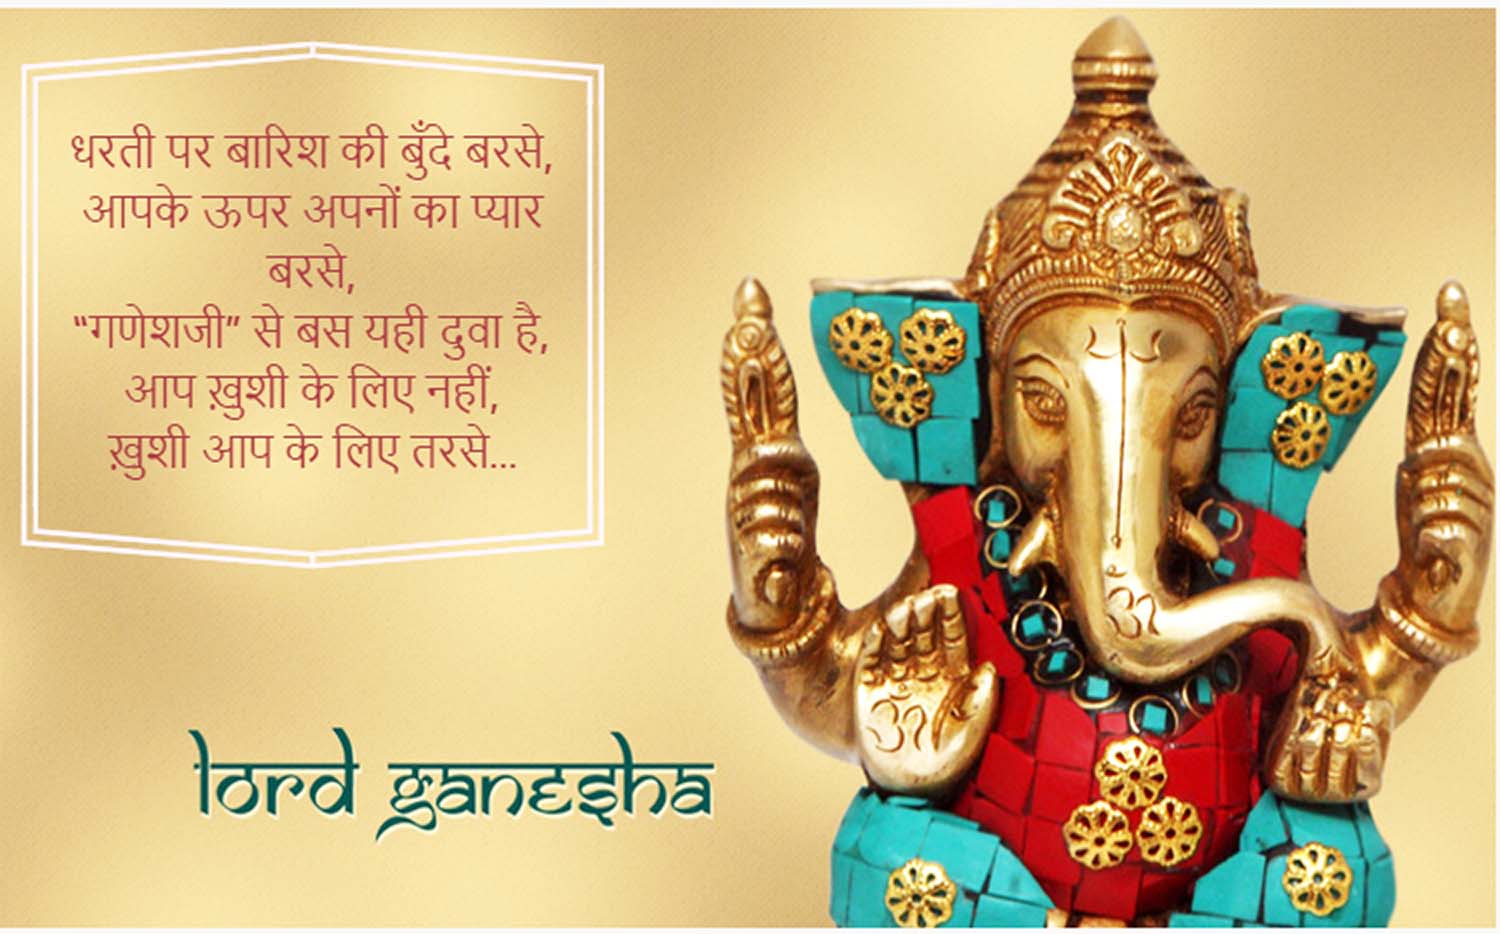 Happy Ganesh Chaturthi messages in Hindi